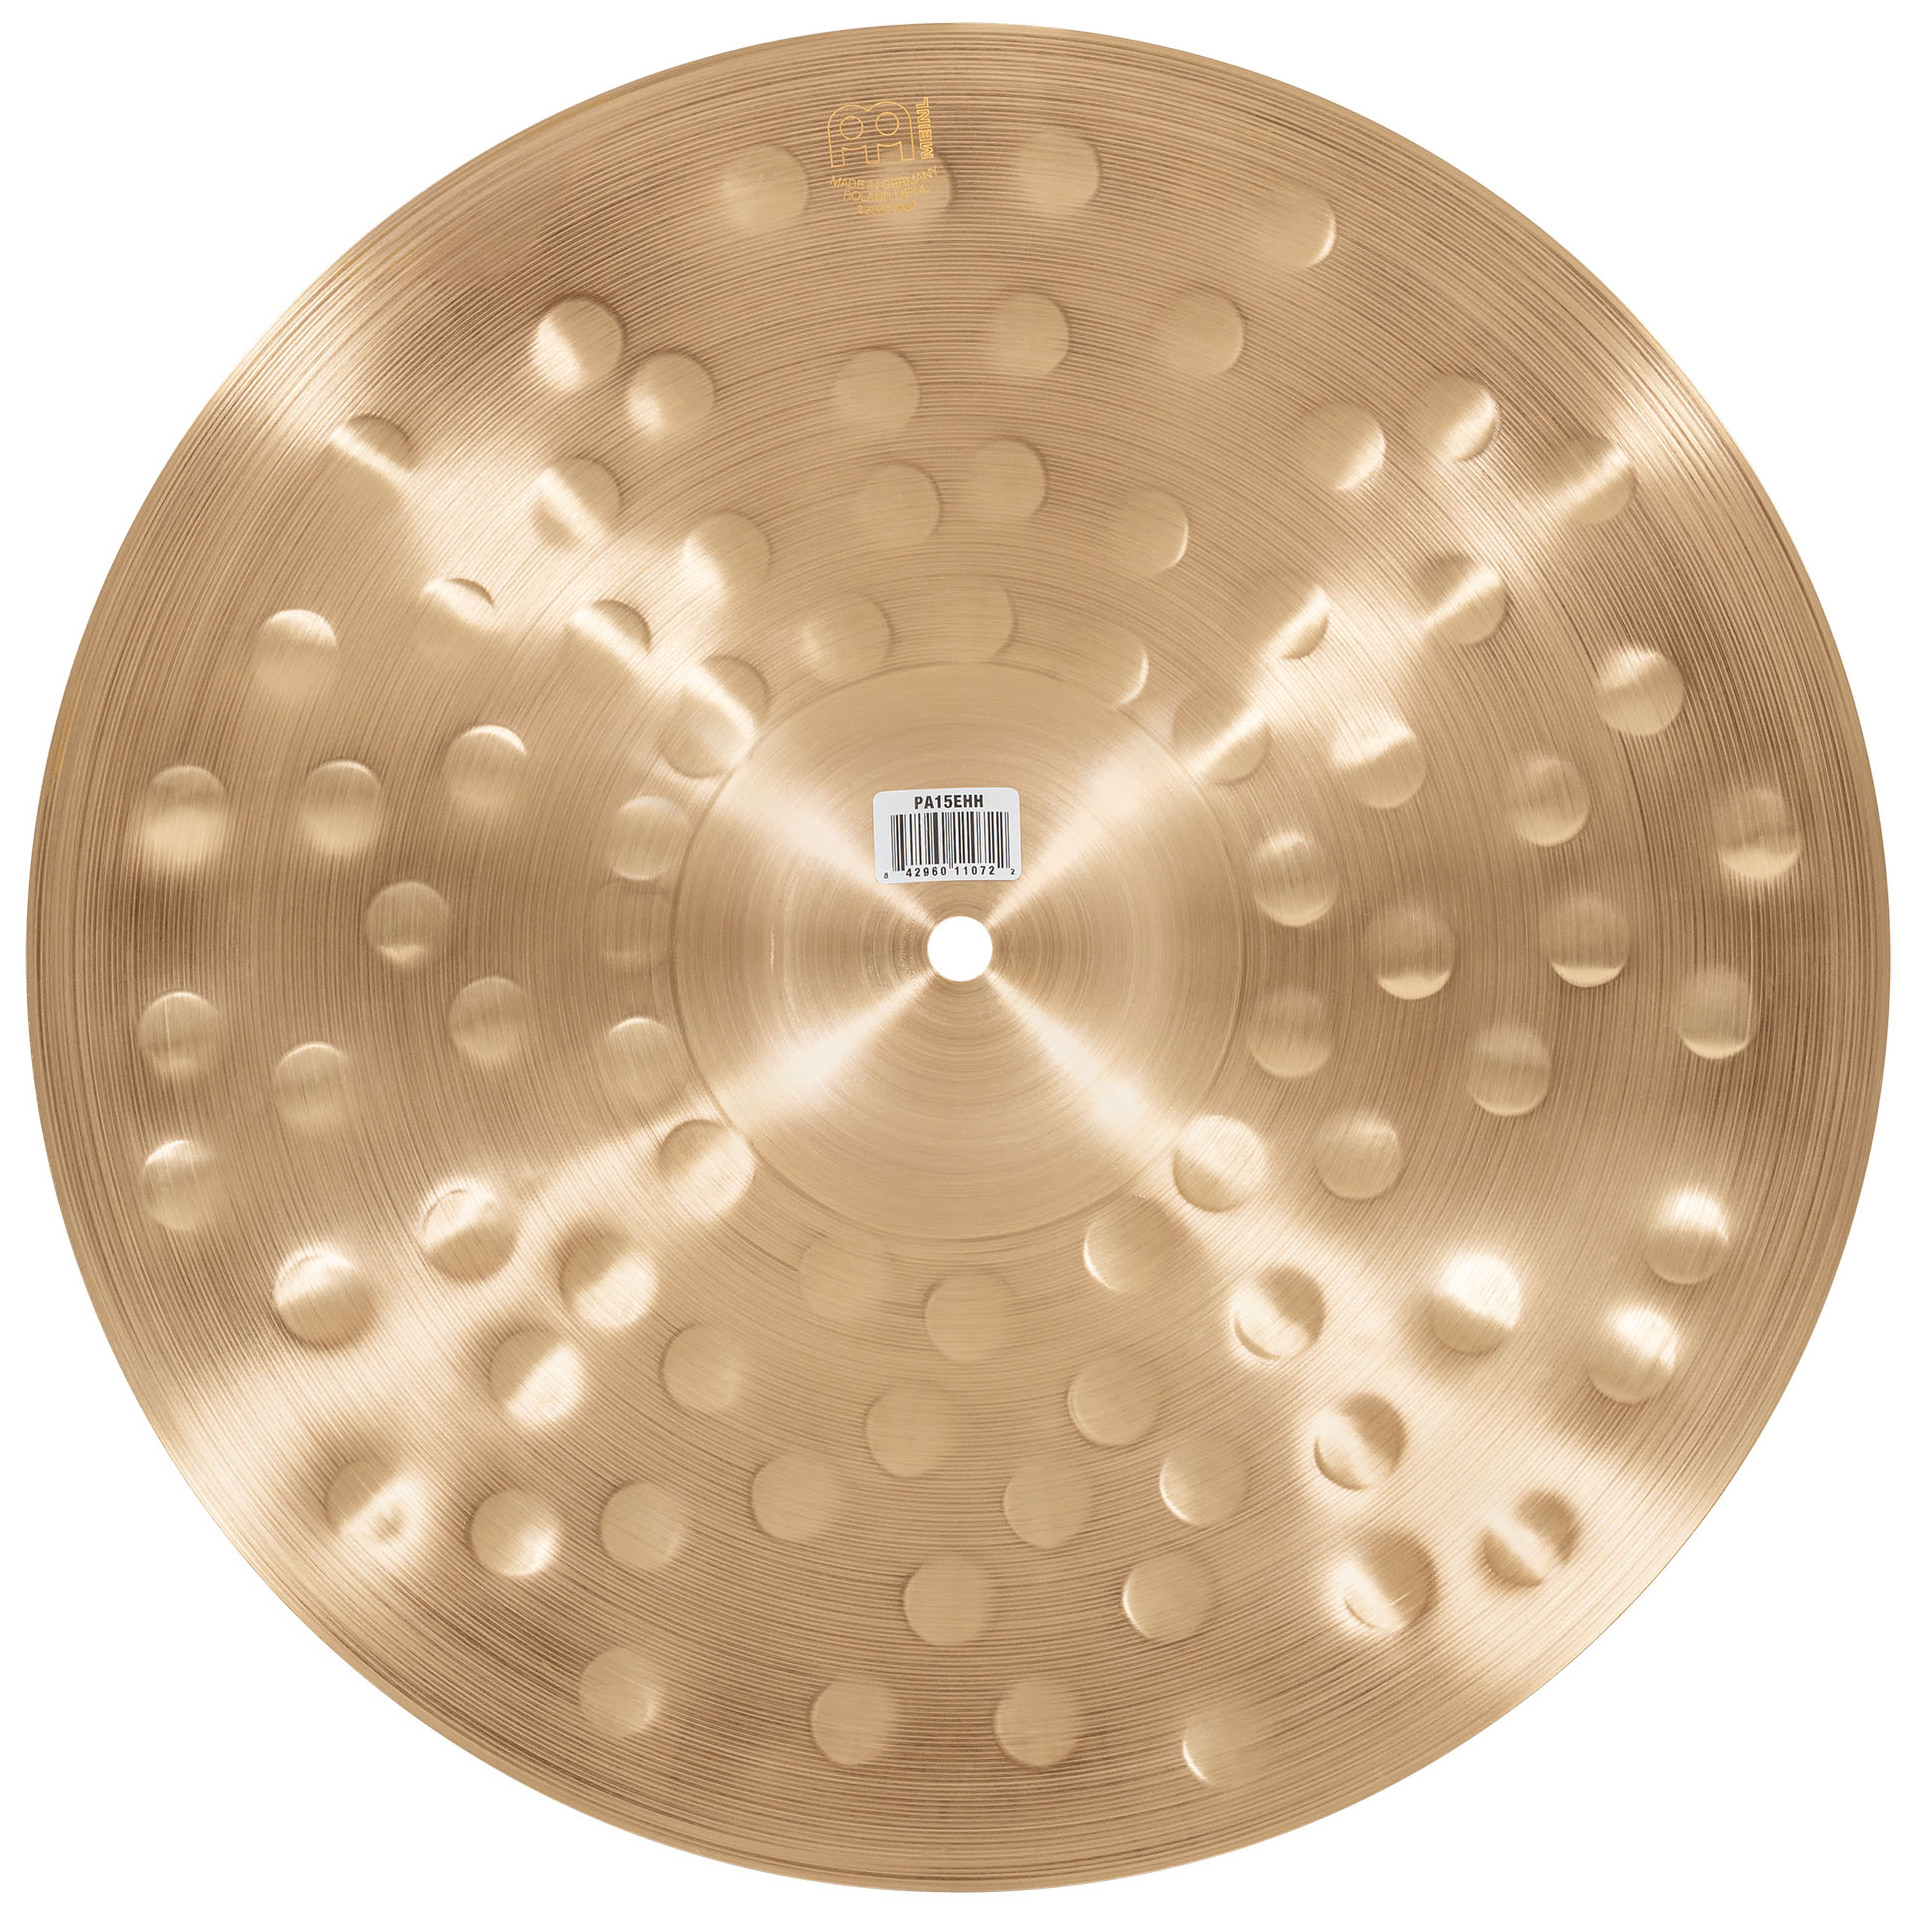 Meinl Cymbals PA15EHH - 15" Pure Alloy Extra Hammered Hihat 11